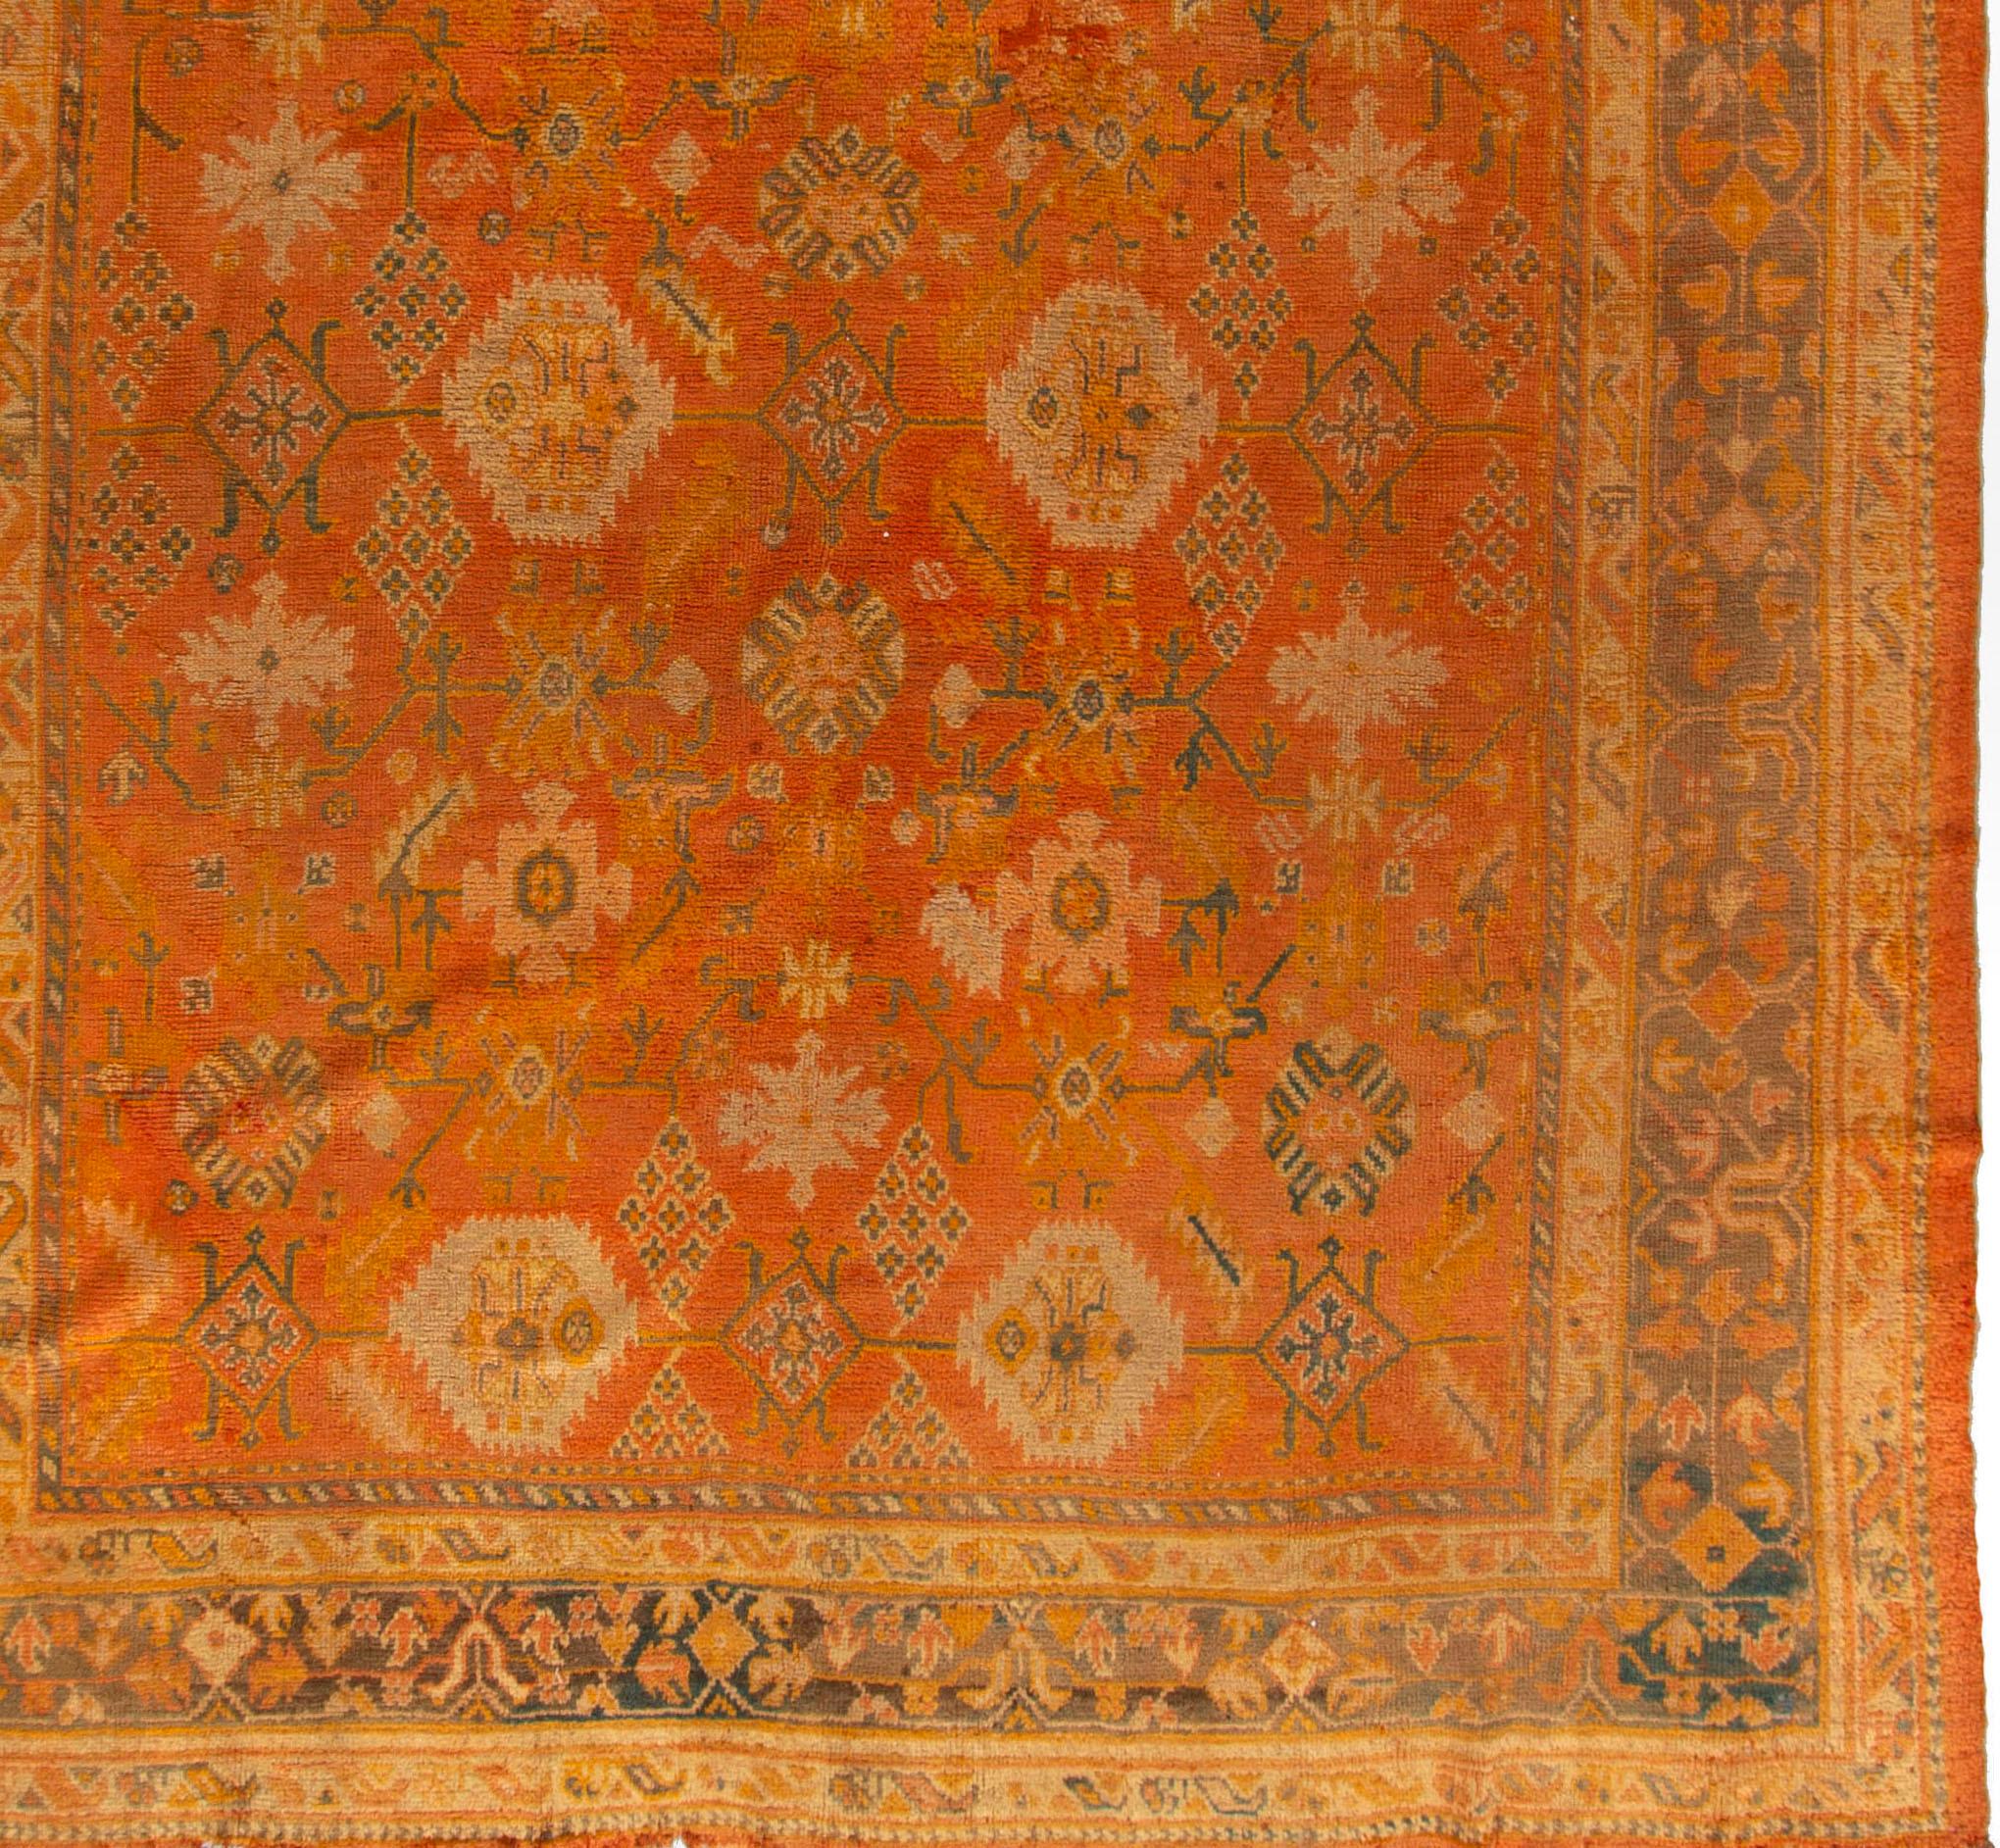 Antique Turkish Oushak Area Rug  10'3 x 13' In Good Condition For Sale In New York, NY